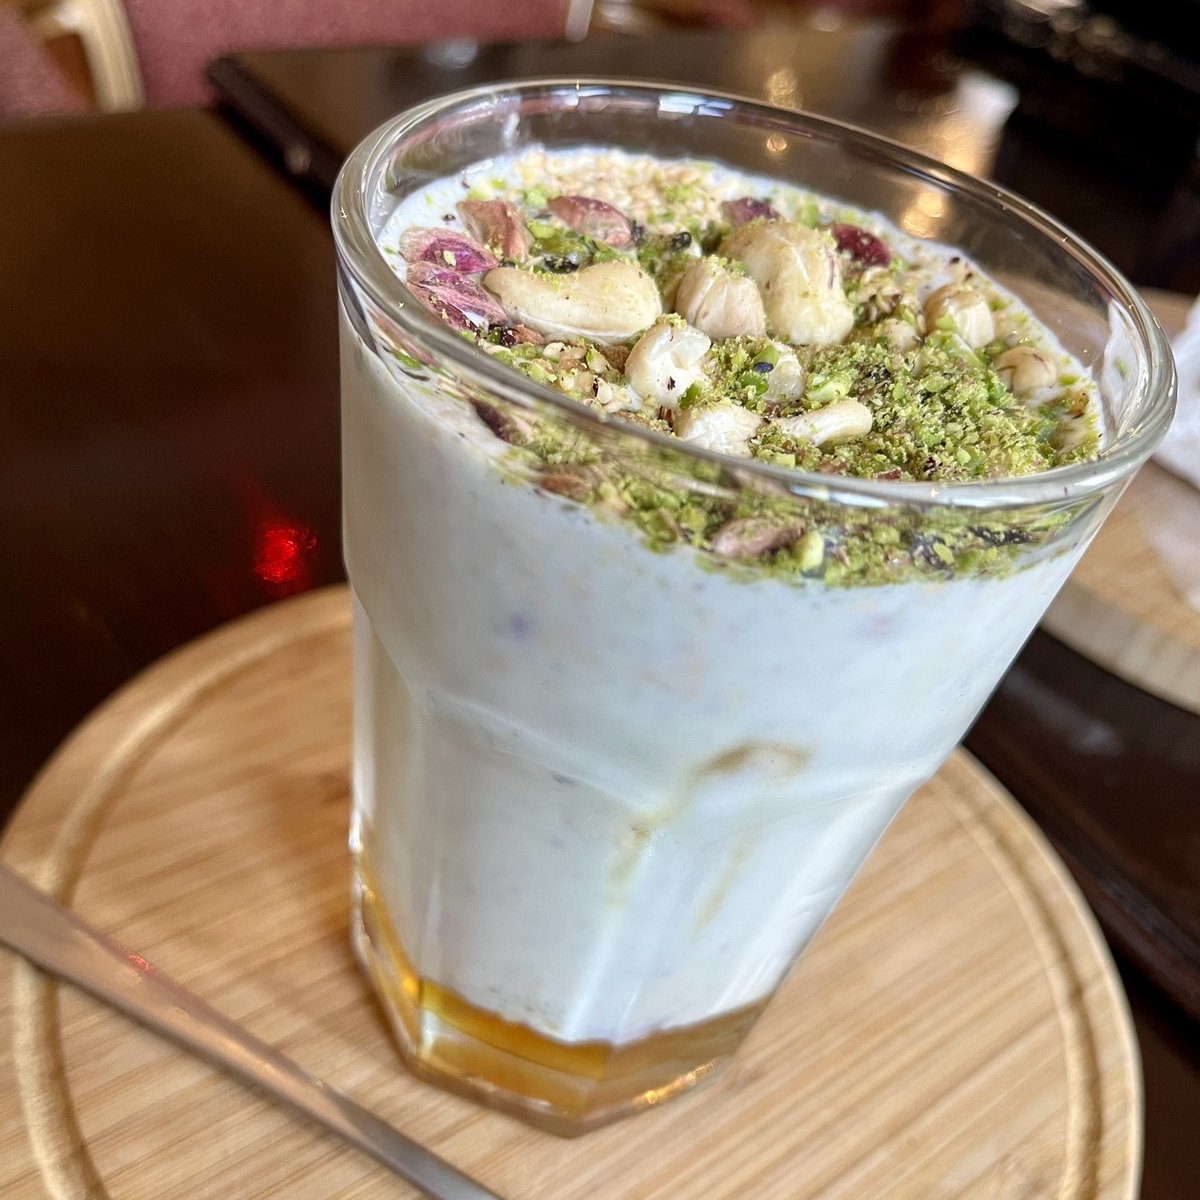 Mashhad in Iran is mainly known for pious pilgrims but is also home to a luscious, low-key culinary secret called majoon. Part shake, part dessert it’s made with crushed walnuts, banana, ice cream, cream, honey and ground pistachio. Yum!

📷: @514eats